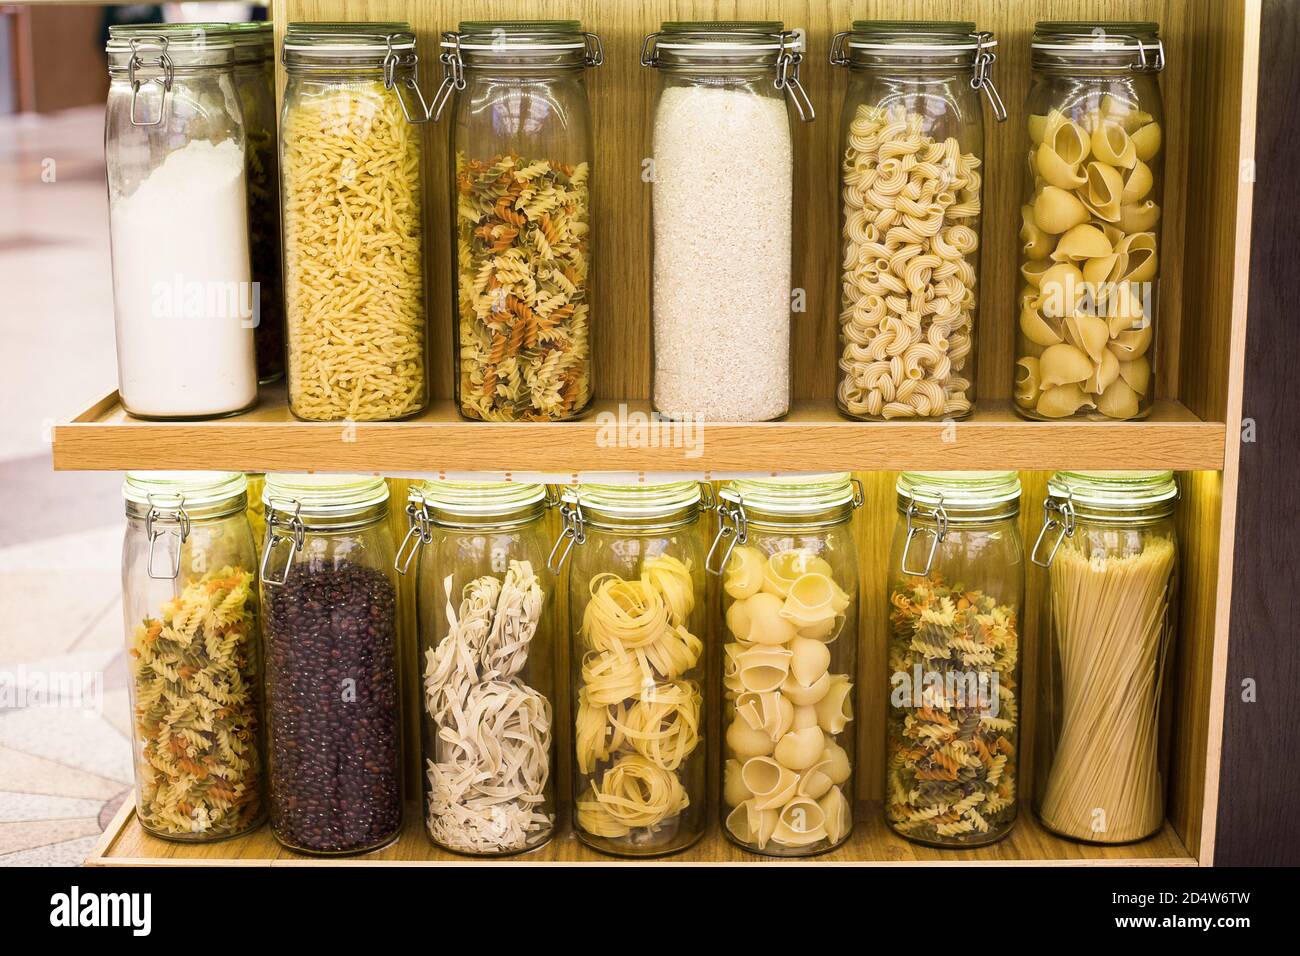 Different types of raw pasta spaghetti, fettuccine, pappardelle, fusilli, cavatappi, pipe rigate, gemelli and cereals beans, rice are stored in closed Stock Photo